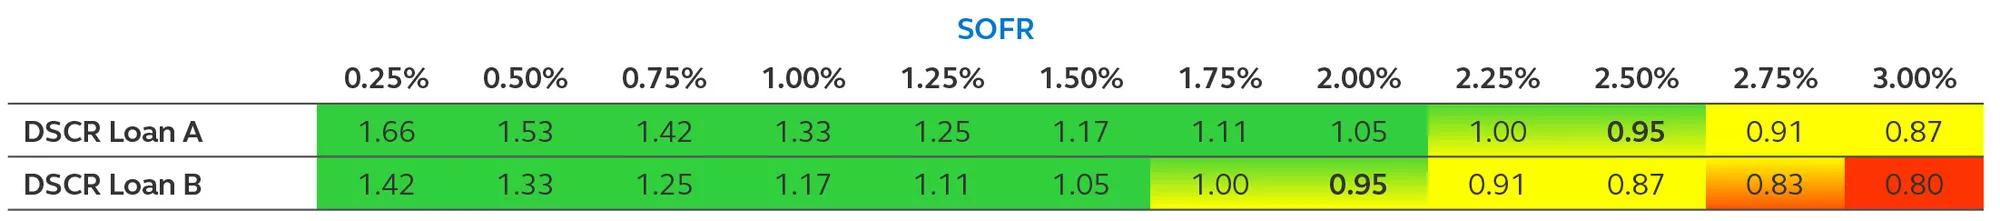 Table highlighting the impact of SOFR on DSCR Loan A and DSCR Loan B as of March, 2022